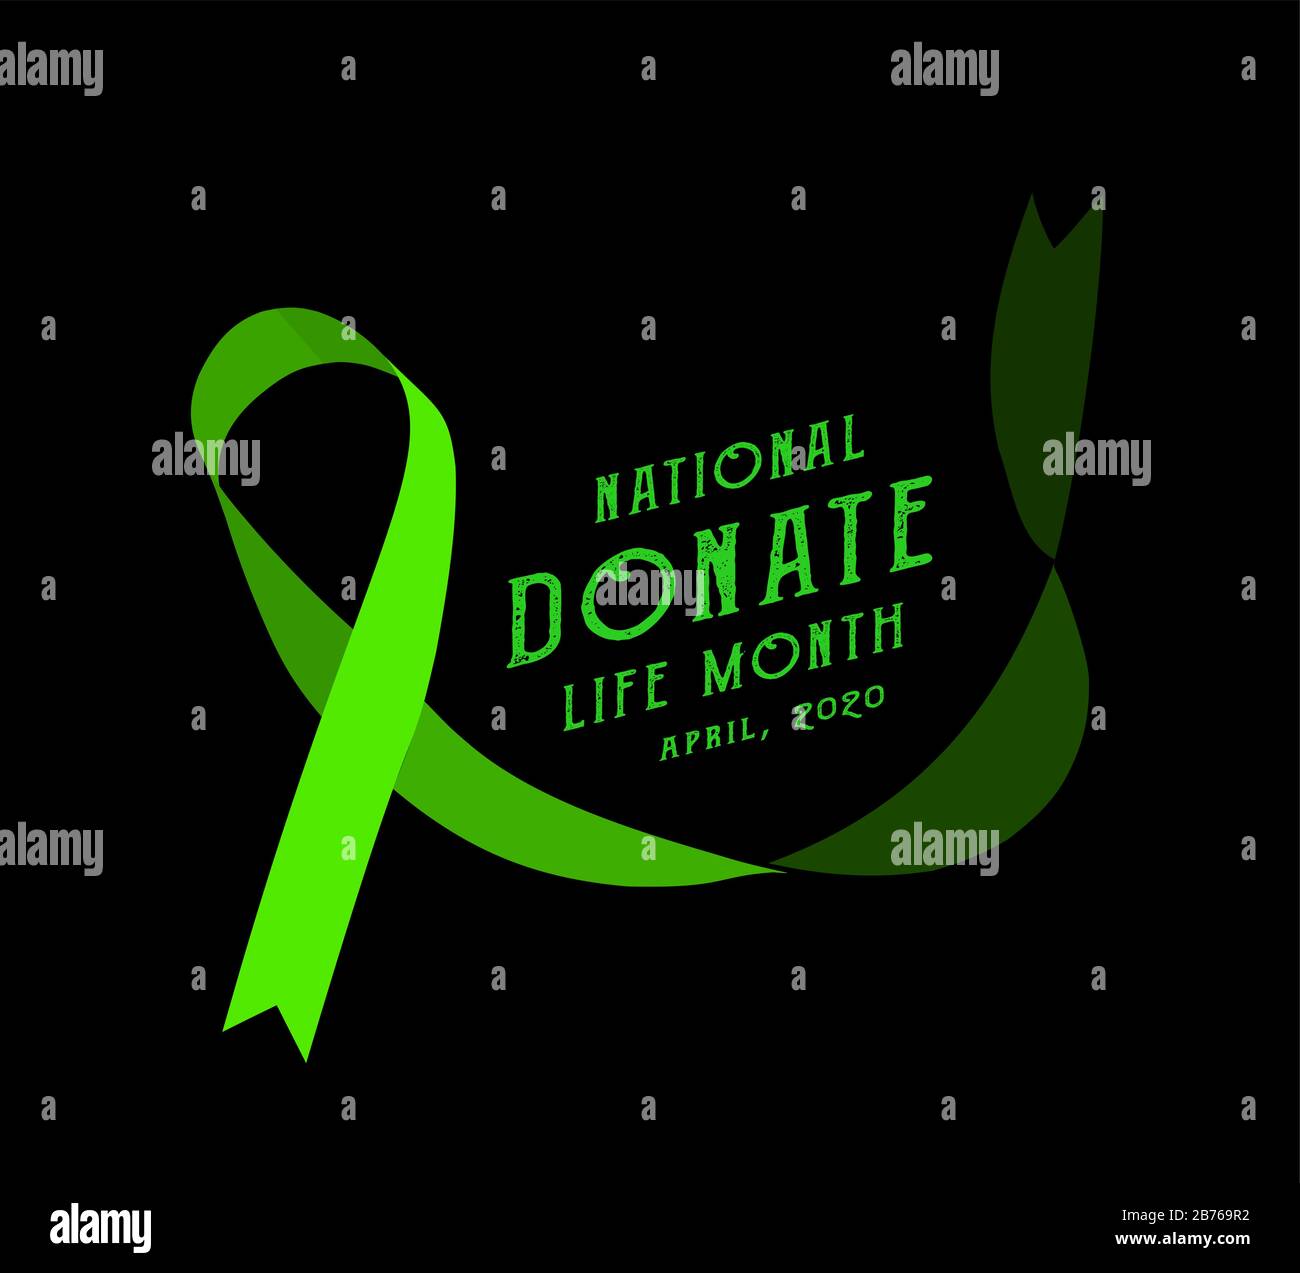 National donate life month. Vector illustration with green ribbon on black Stock Vector